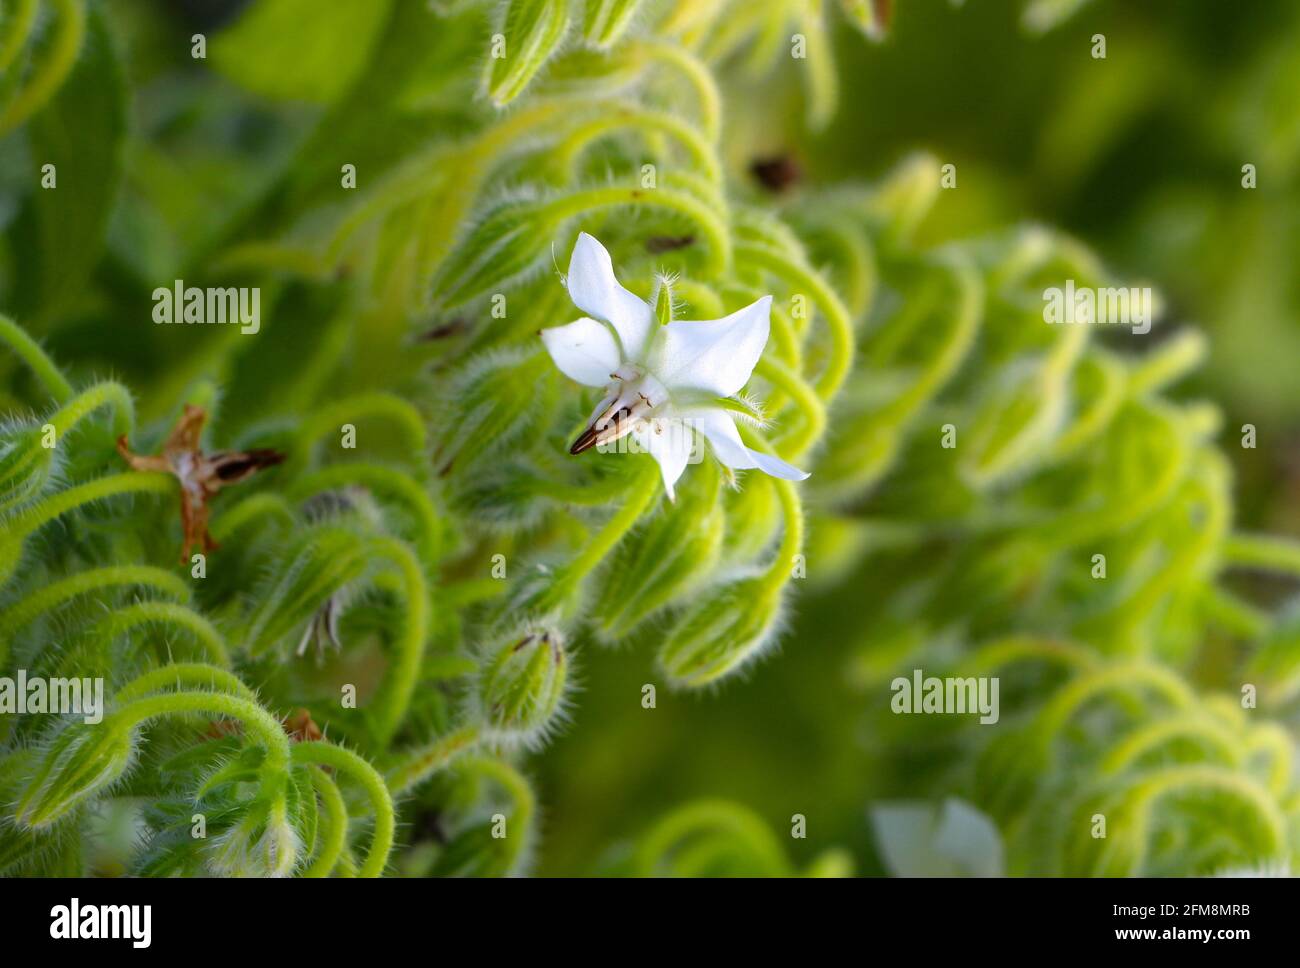 A white Borage flower Starflower or Borago officinalis close up with a short depth of field growing wild Stock Photo